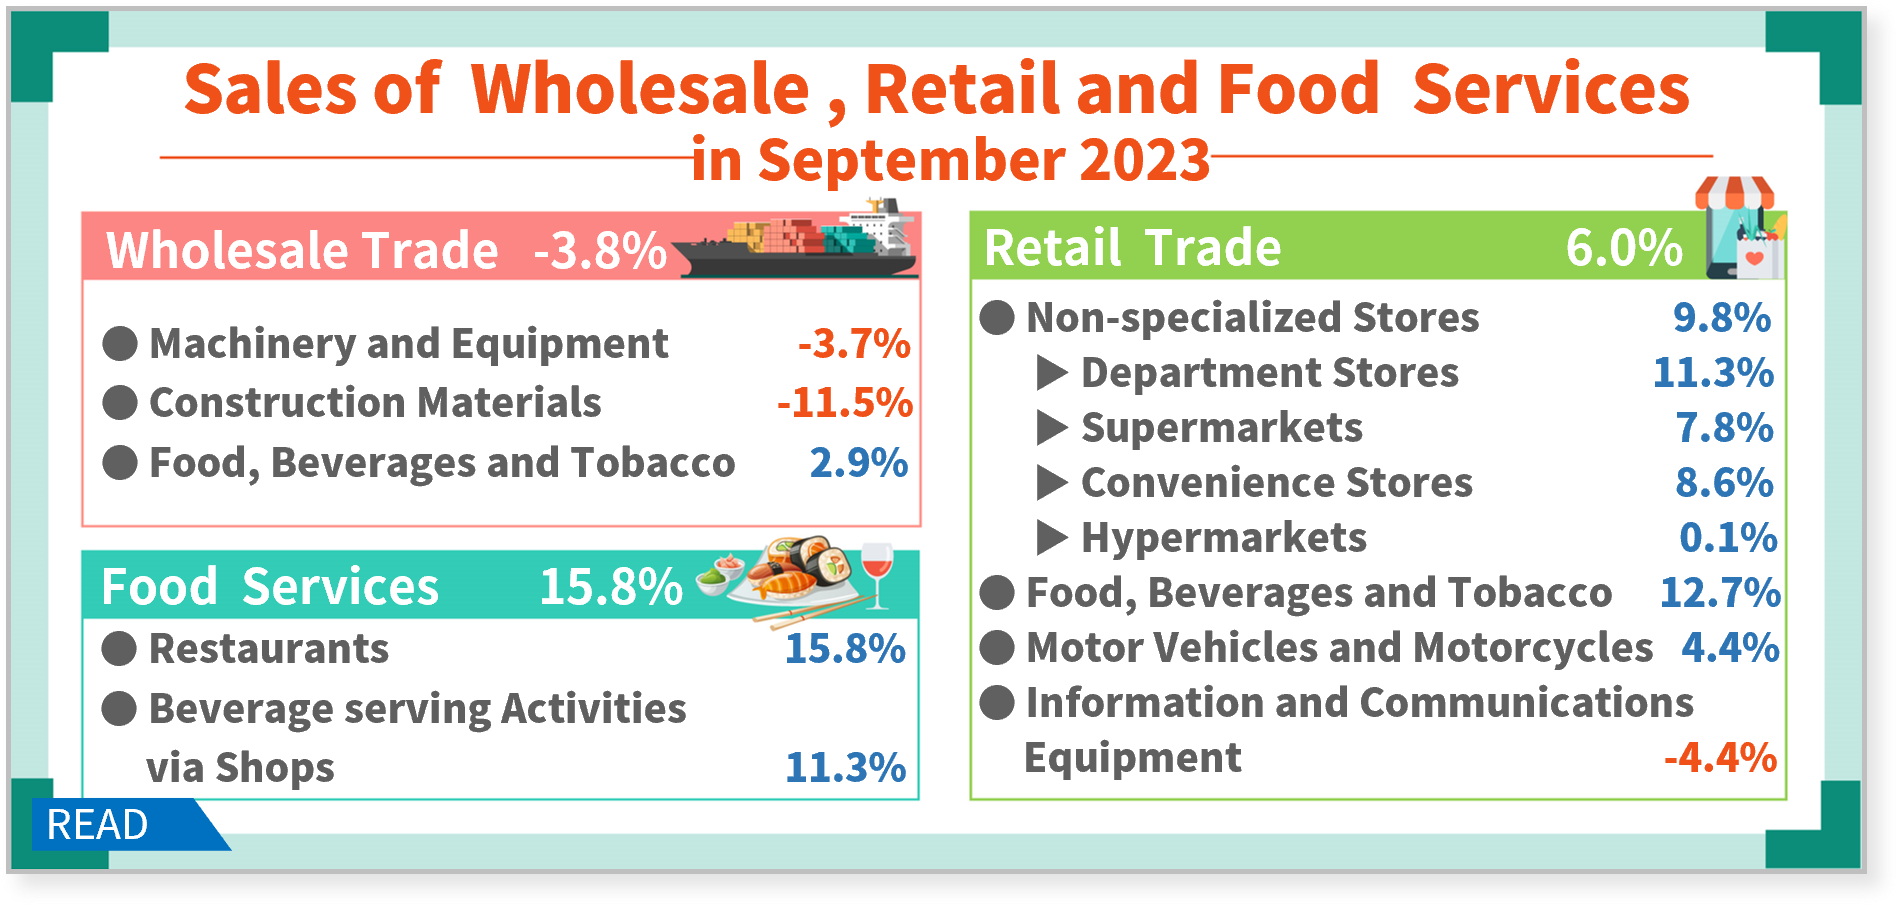 Sales of Wholesale, Retail and Food Services in September 2023